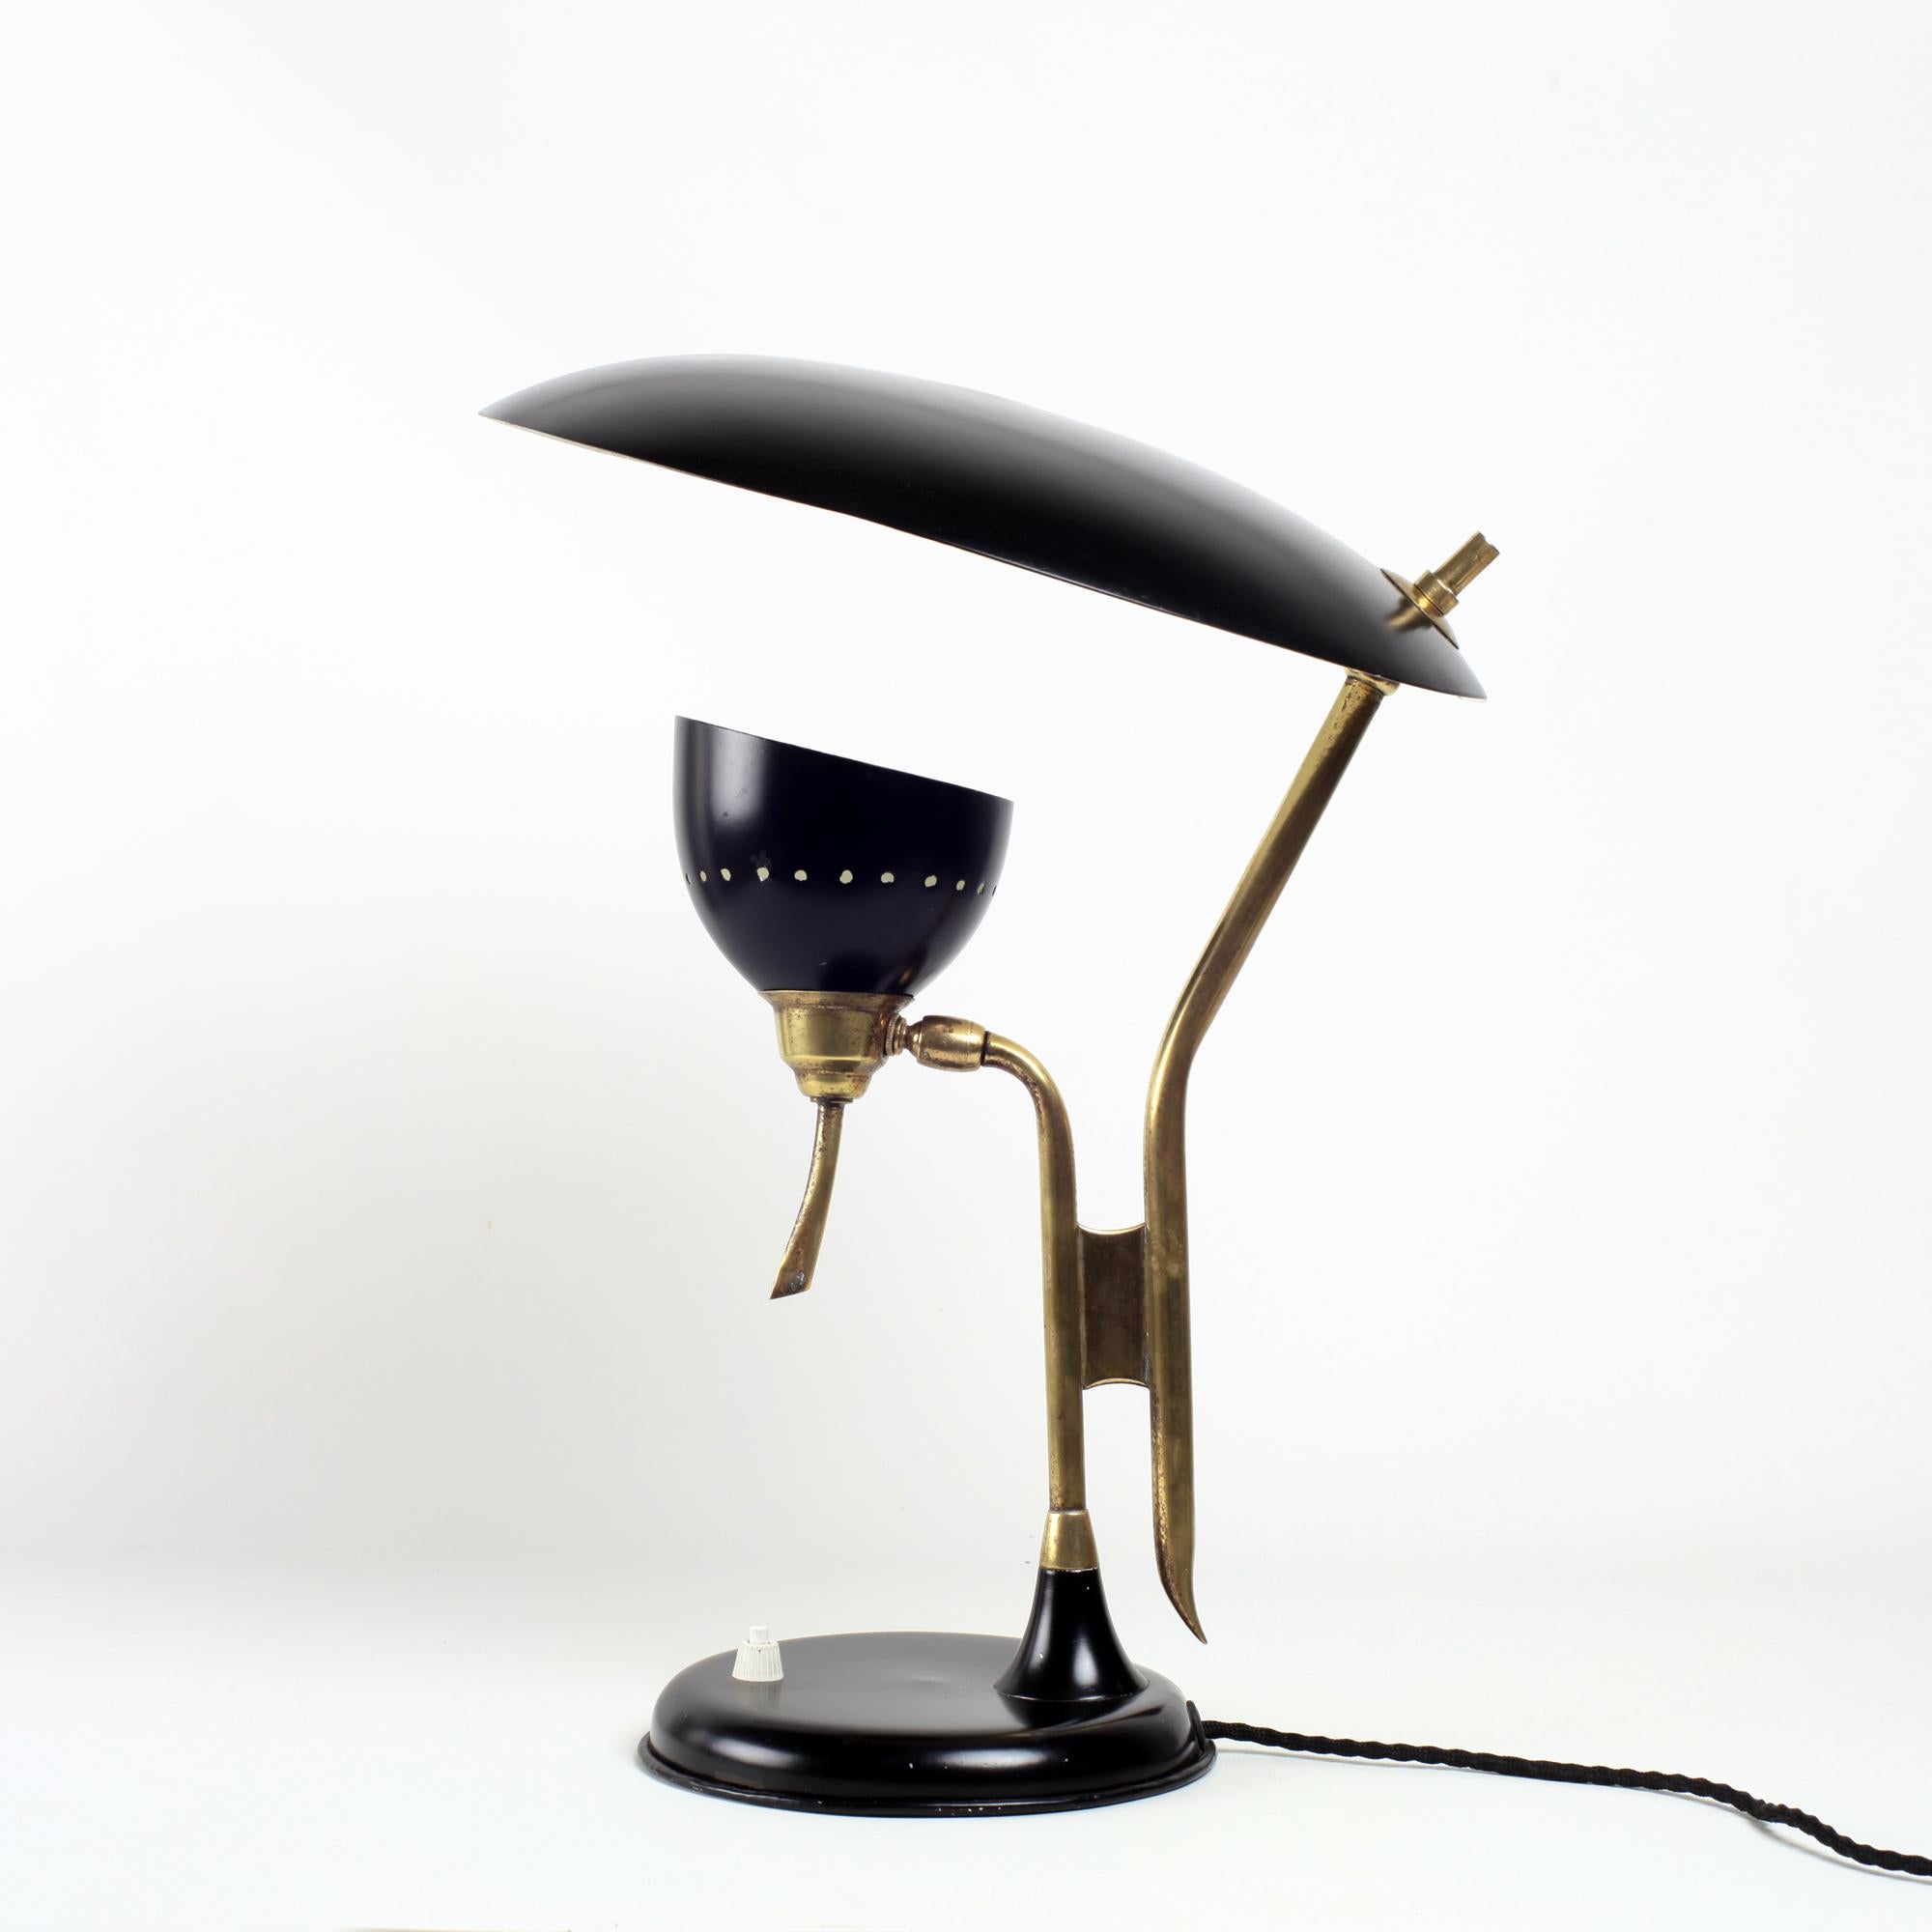 Rare and chic lamp by Oscar Torlasco for Lumi from the 50s. Black lacquered metal and brass with a beautiful patina.